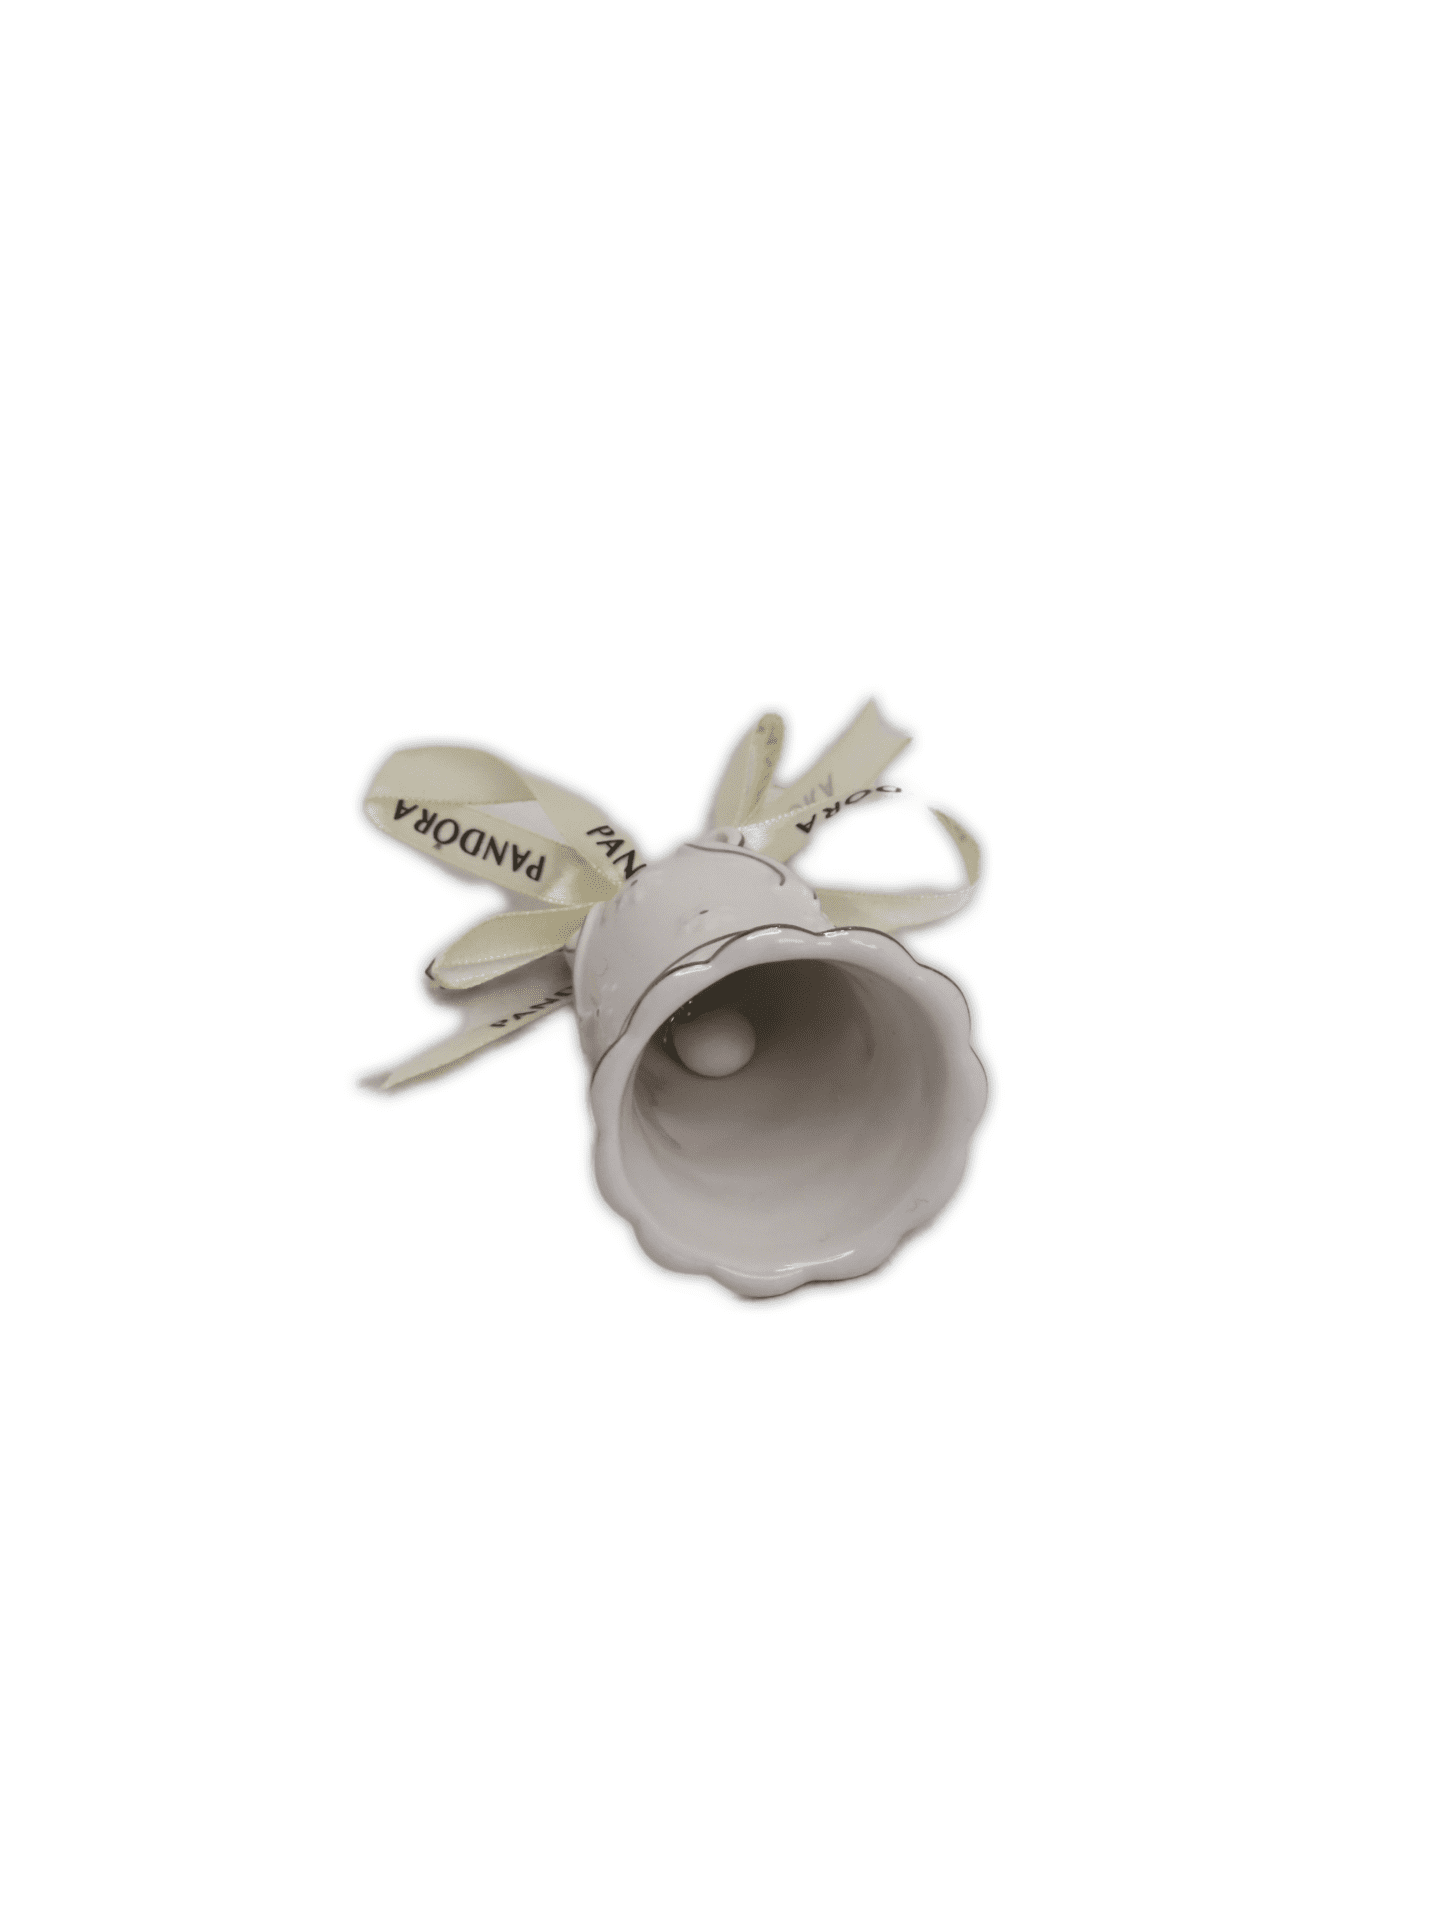 From Pandora, decorate your tree with this limited-edition, handmade bell ornament. White in color and made from porcelain. Light in weight with handmade designs.